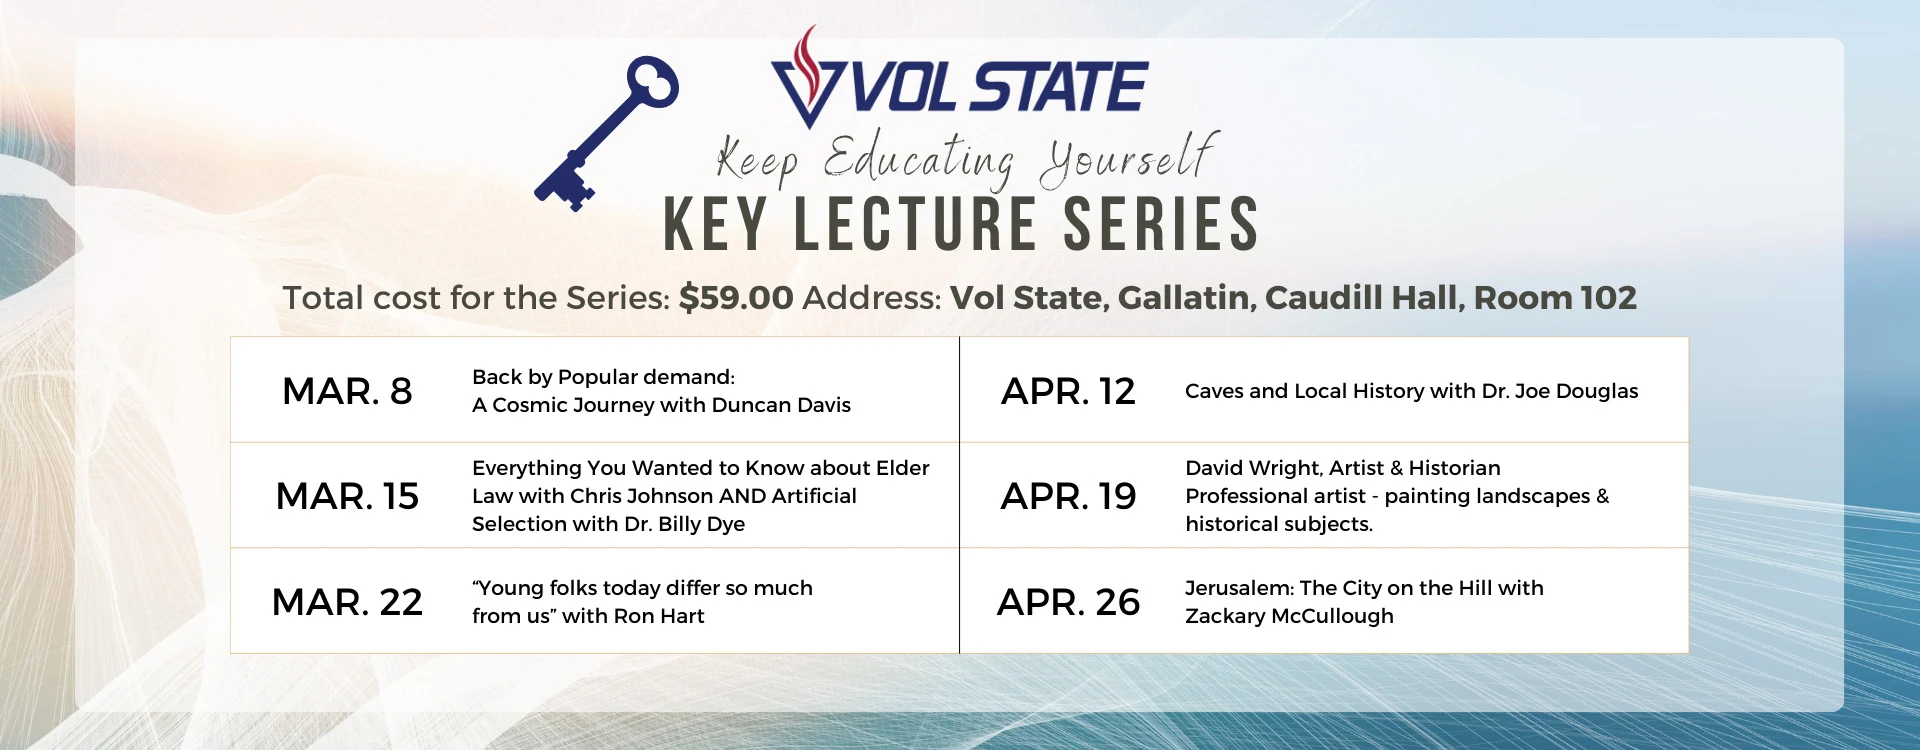 KEY Lecture Series